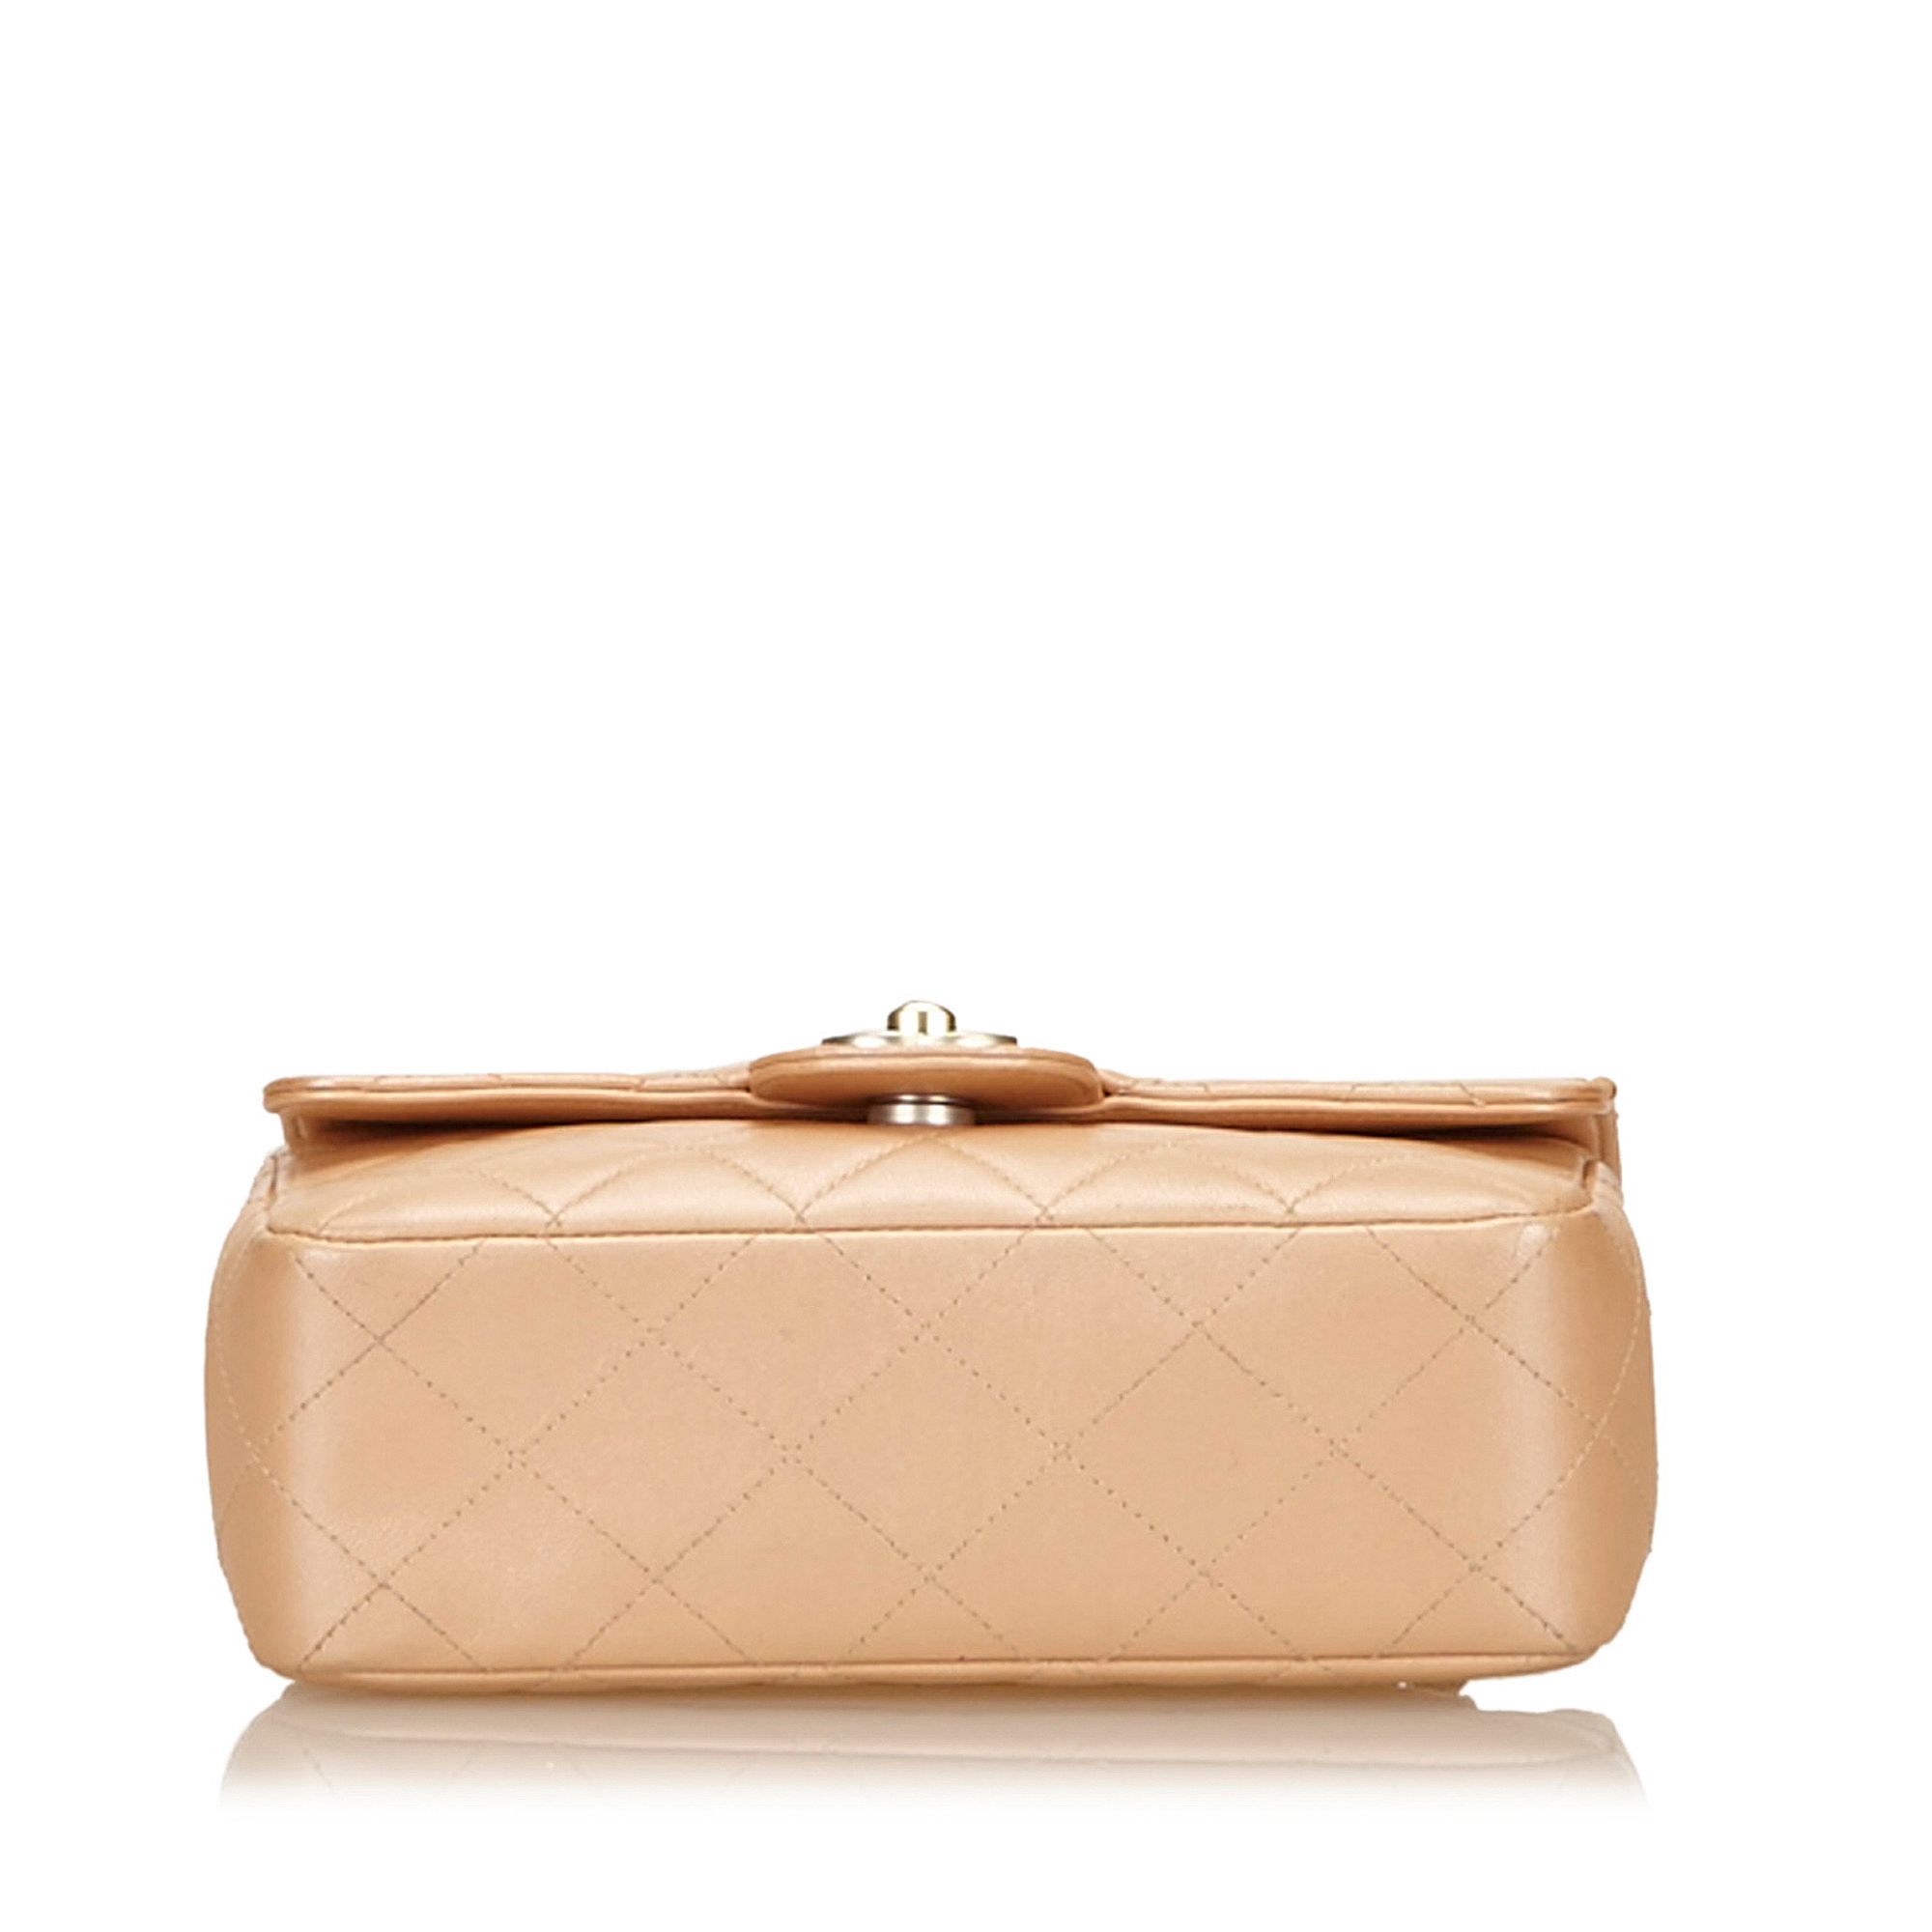 CHANEL PALE METALLIC PINK SMALL SINGLE FLAP HANDBAG, date code for 2000-02, quilted leather with - Image 7 of 16